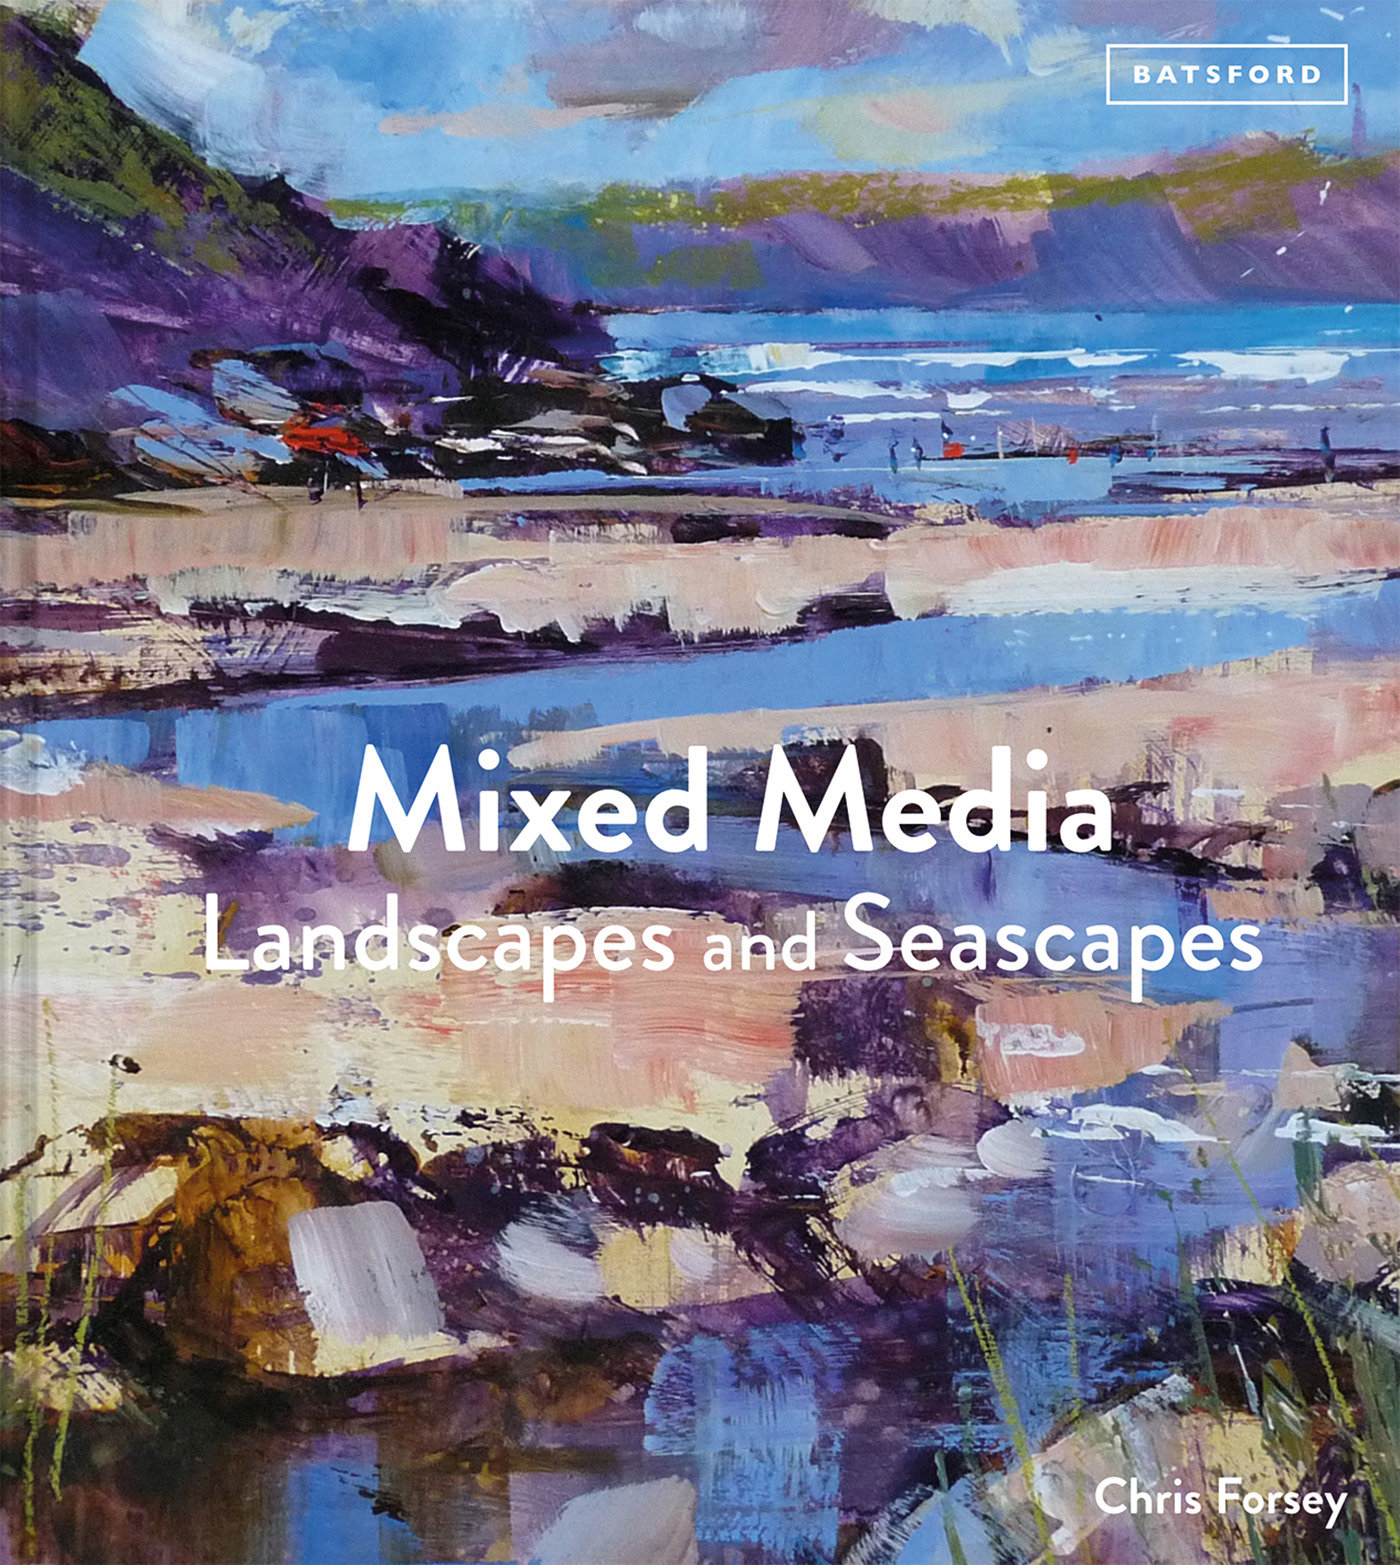 Mixed Media Landscapes And Seascapes (Hardcover Book)